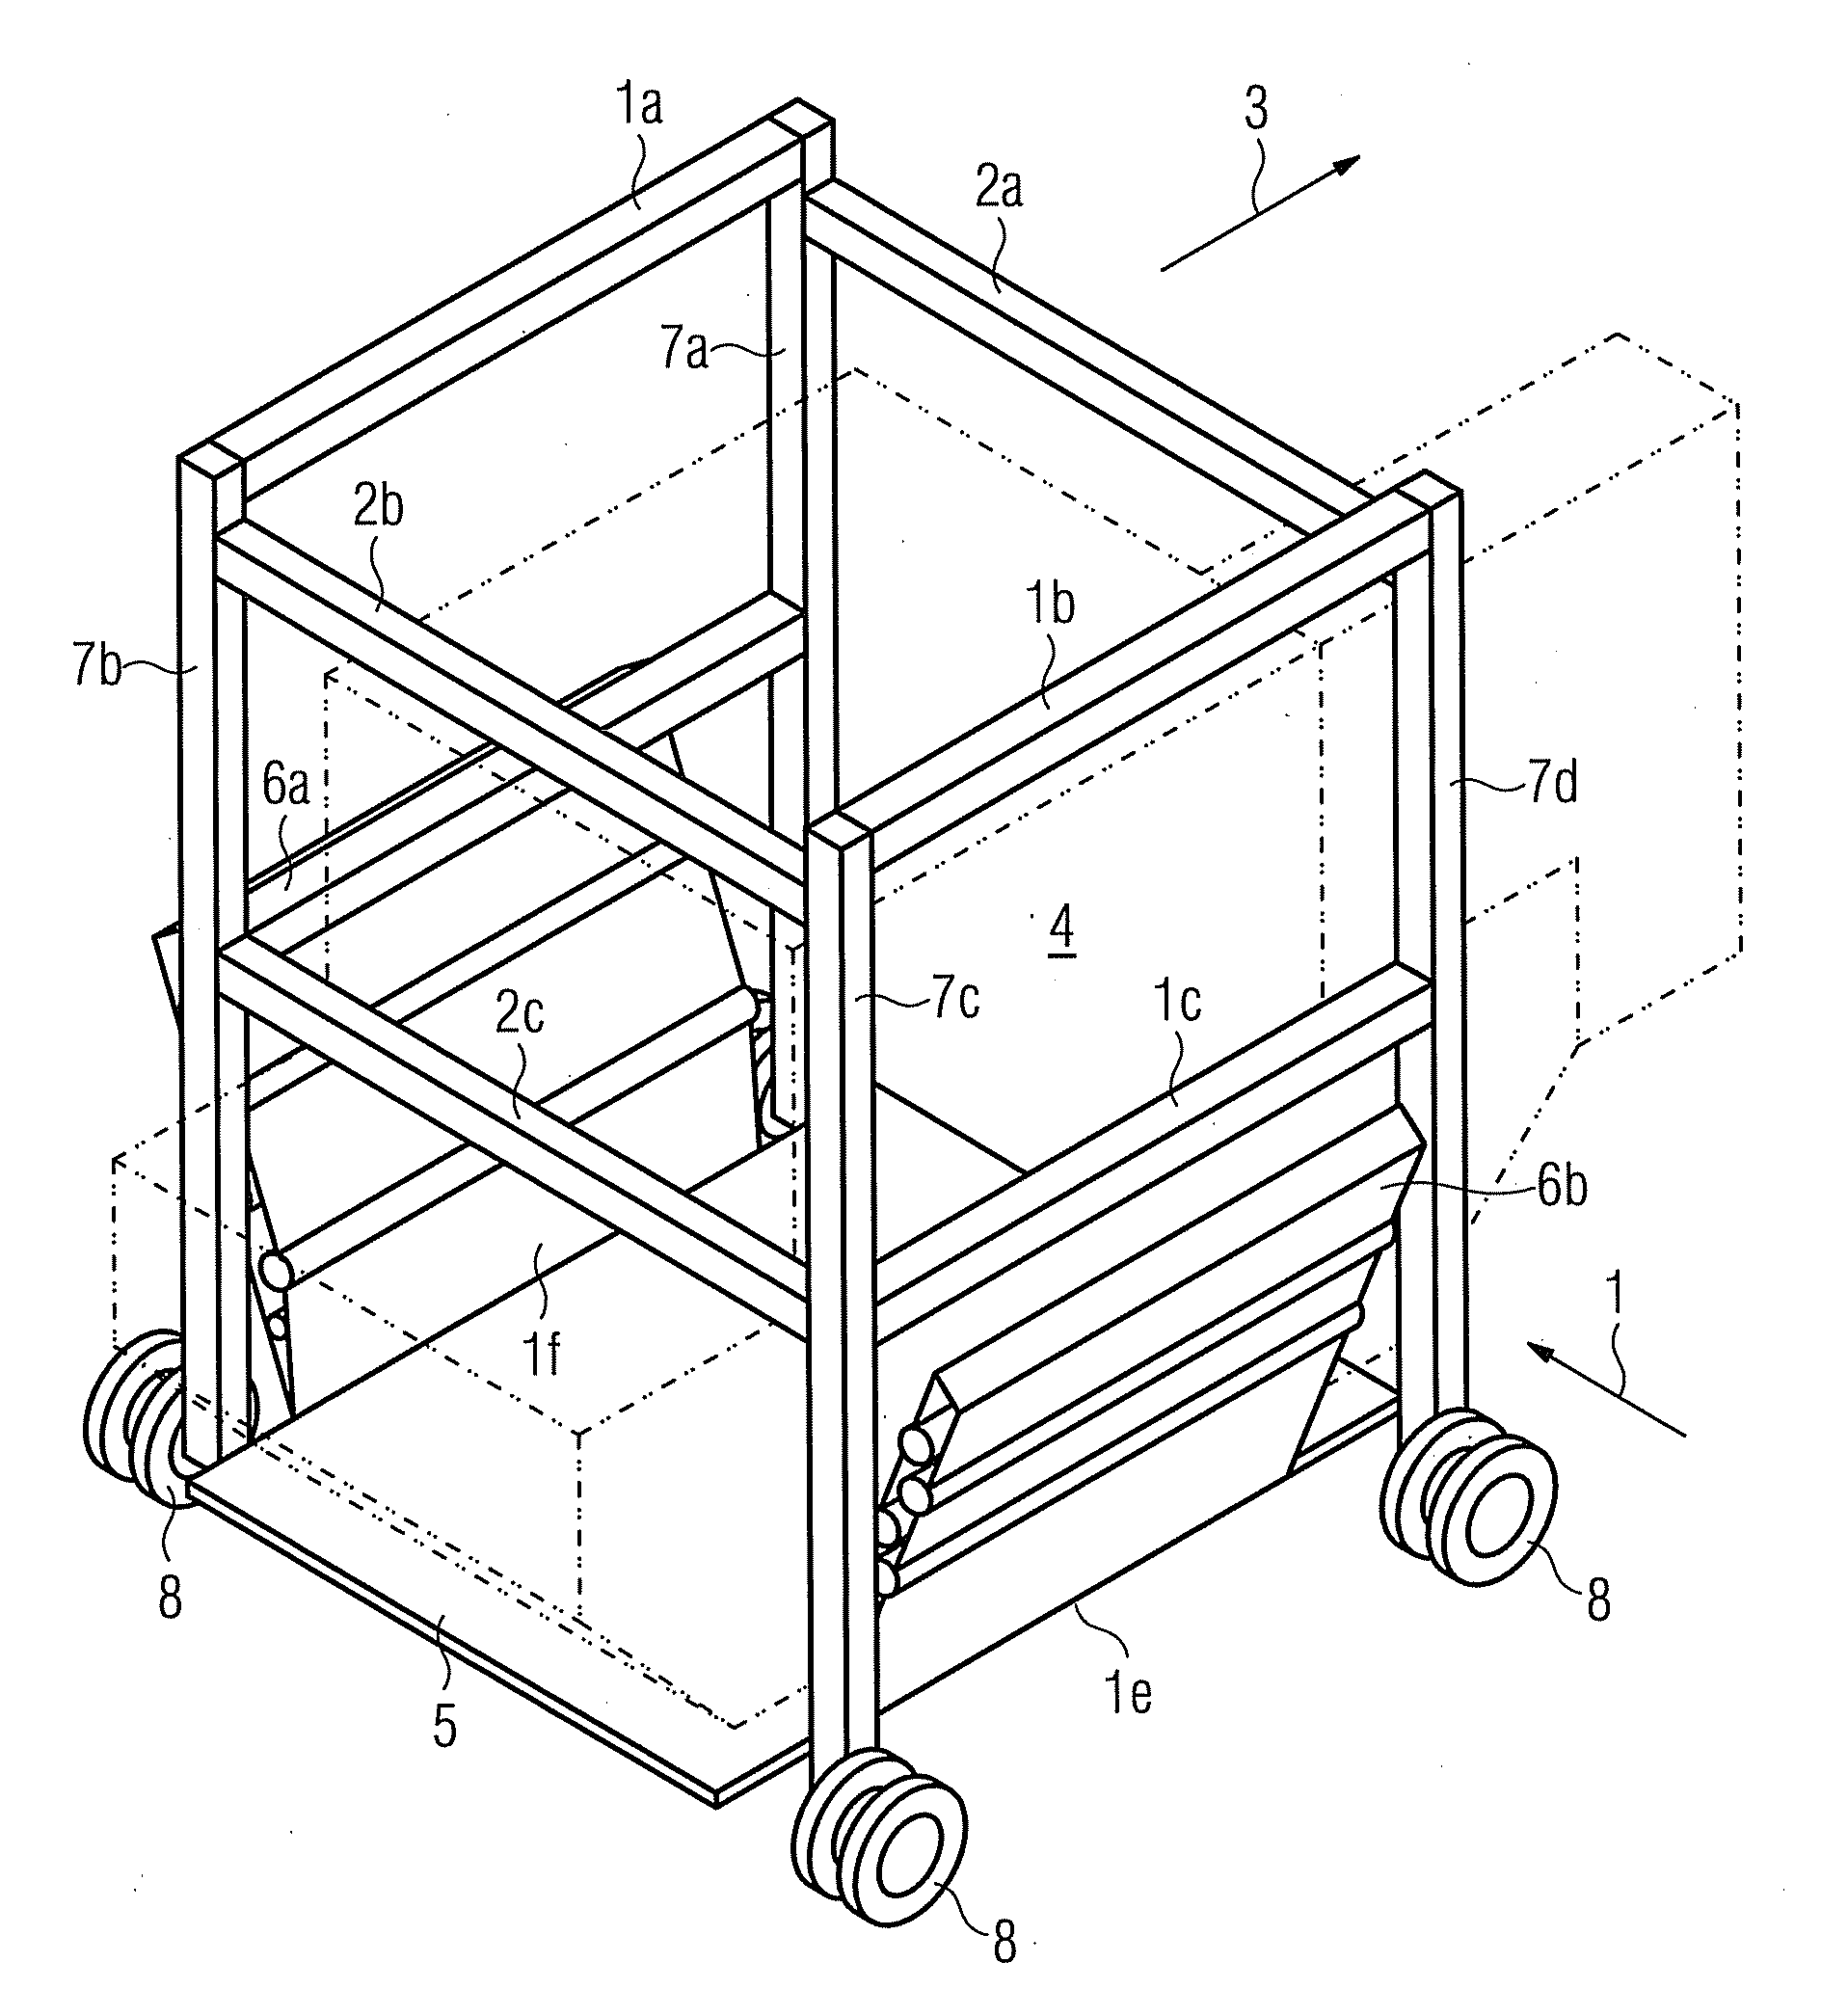 Transport vehicle for raising and transporting ULDs and cargo pallets